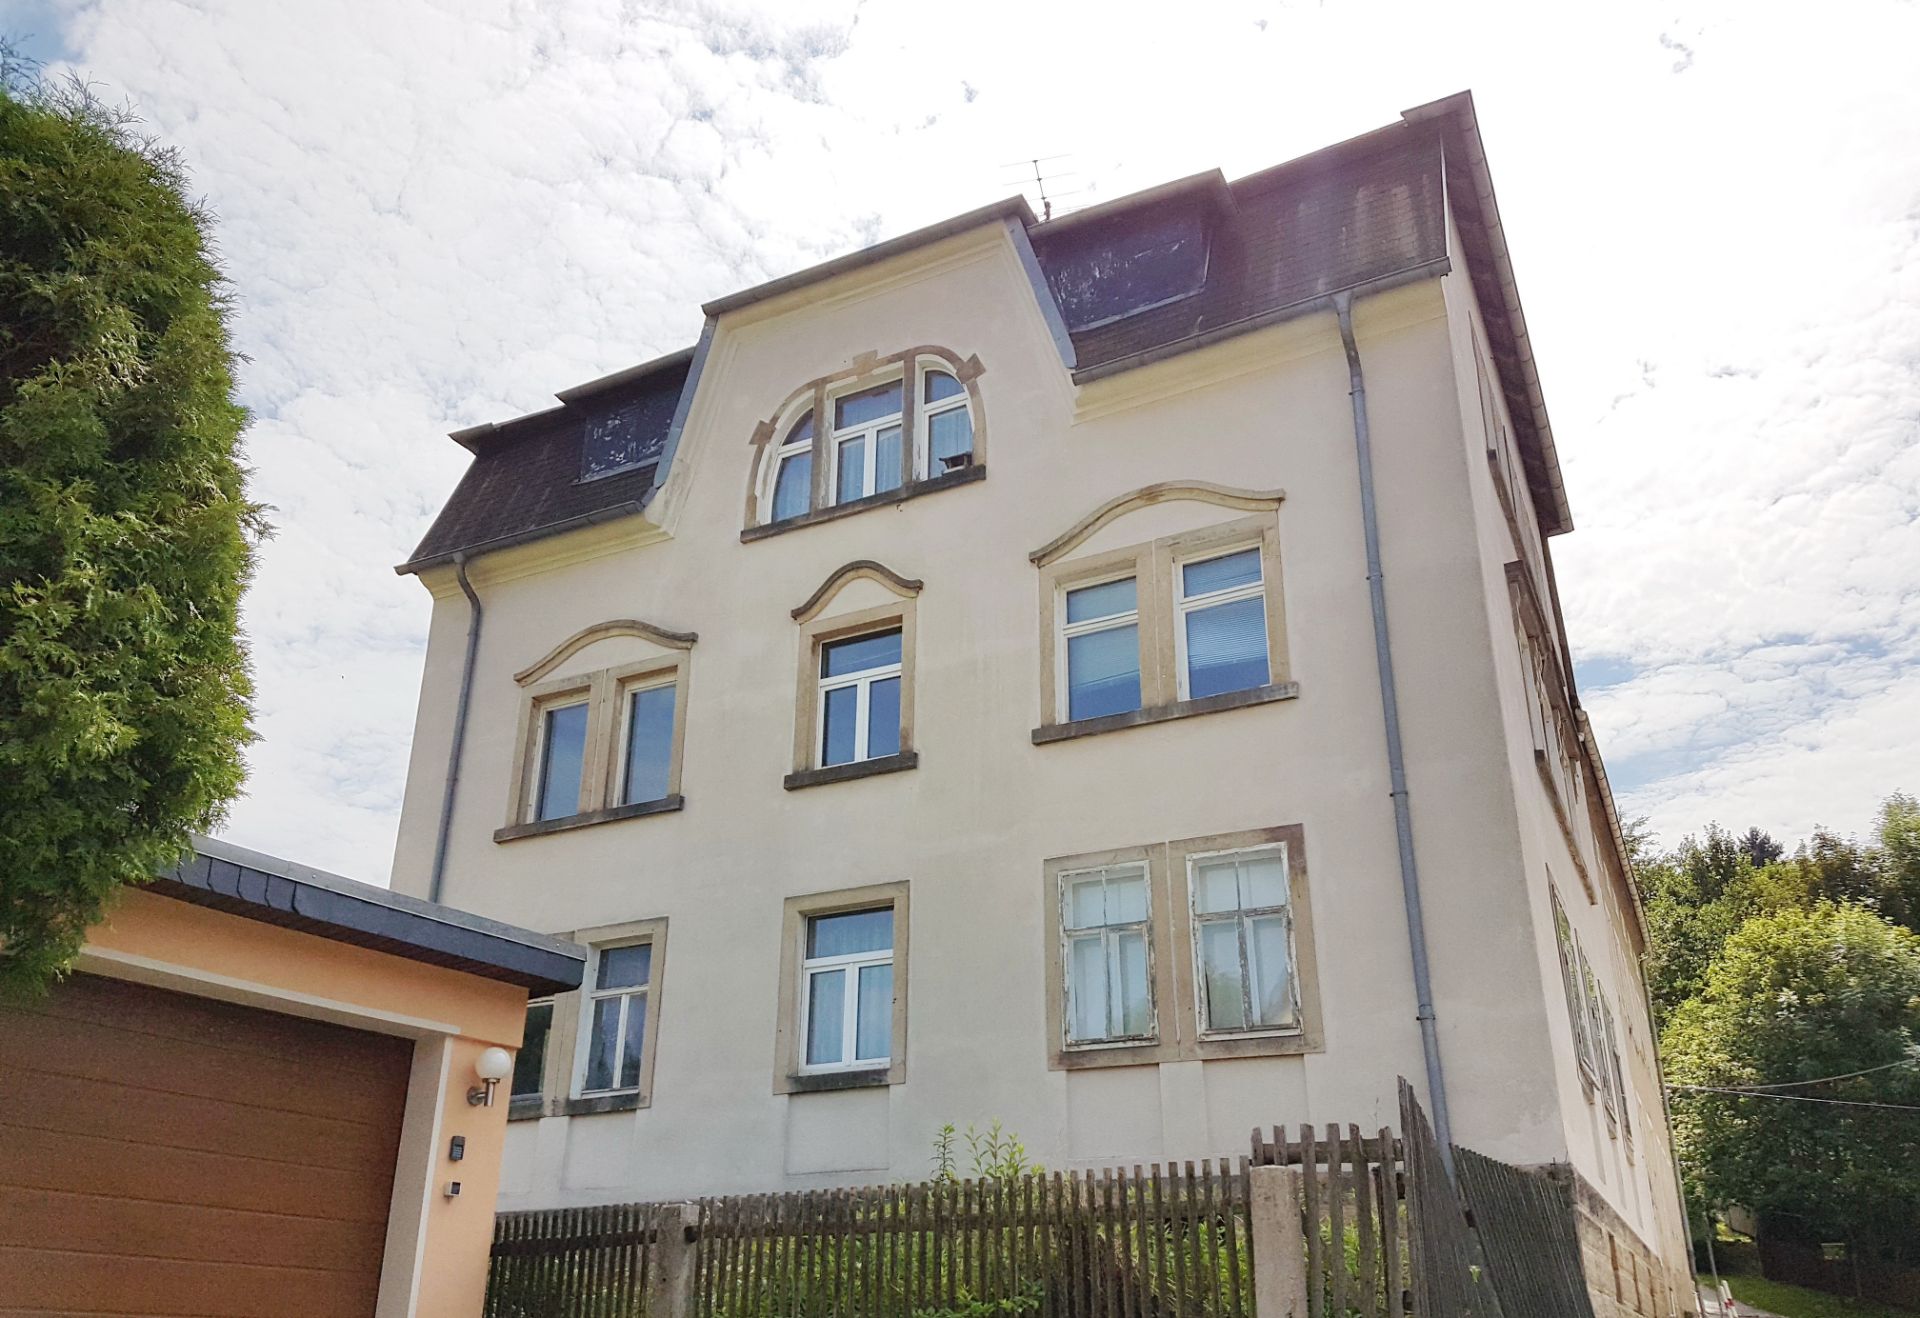 TWO NEIGHBOURING BLOCKS IN GERMANY – OVER 50 ROOMS! *NO RESERVE* - Image 15 of 127